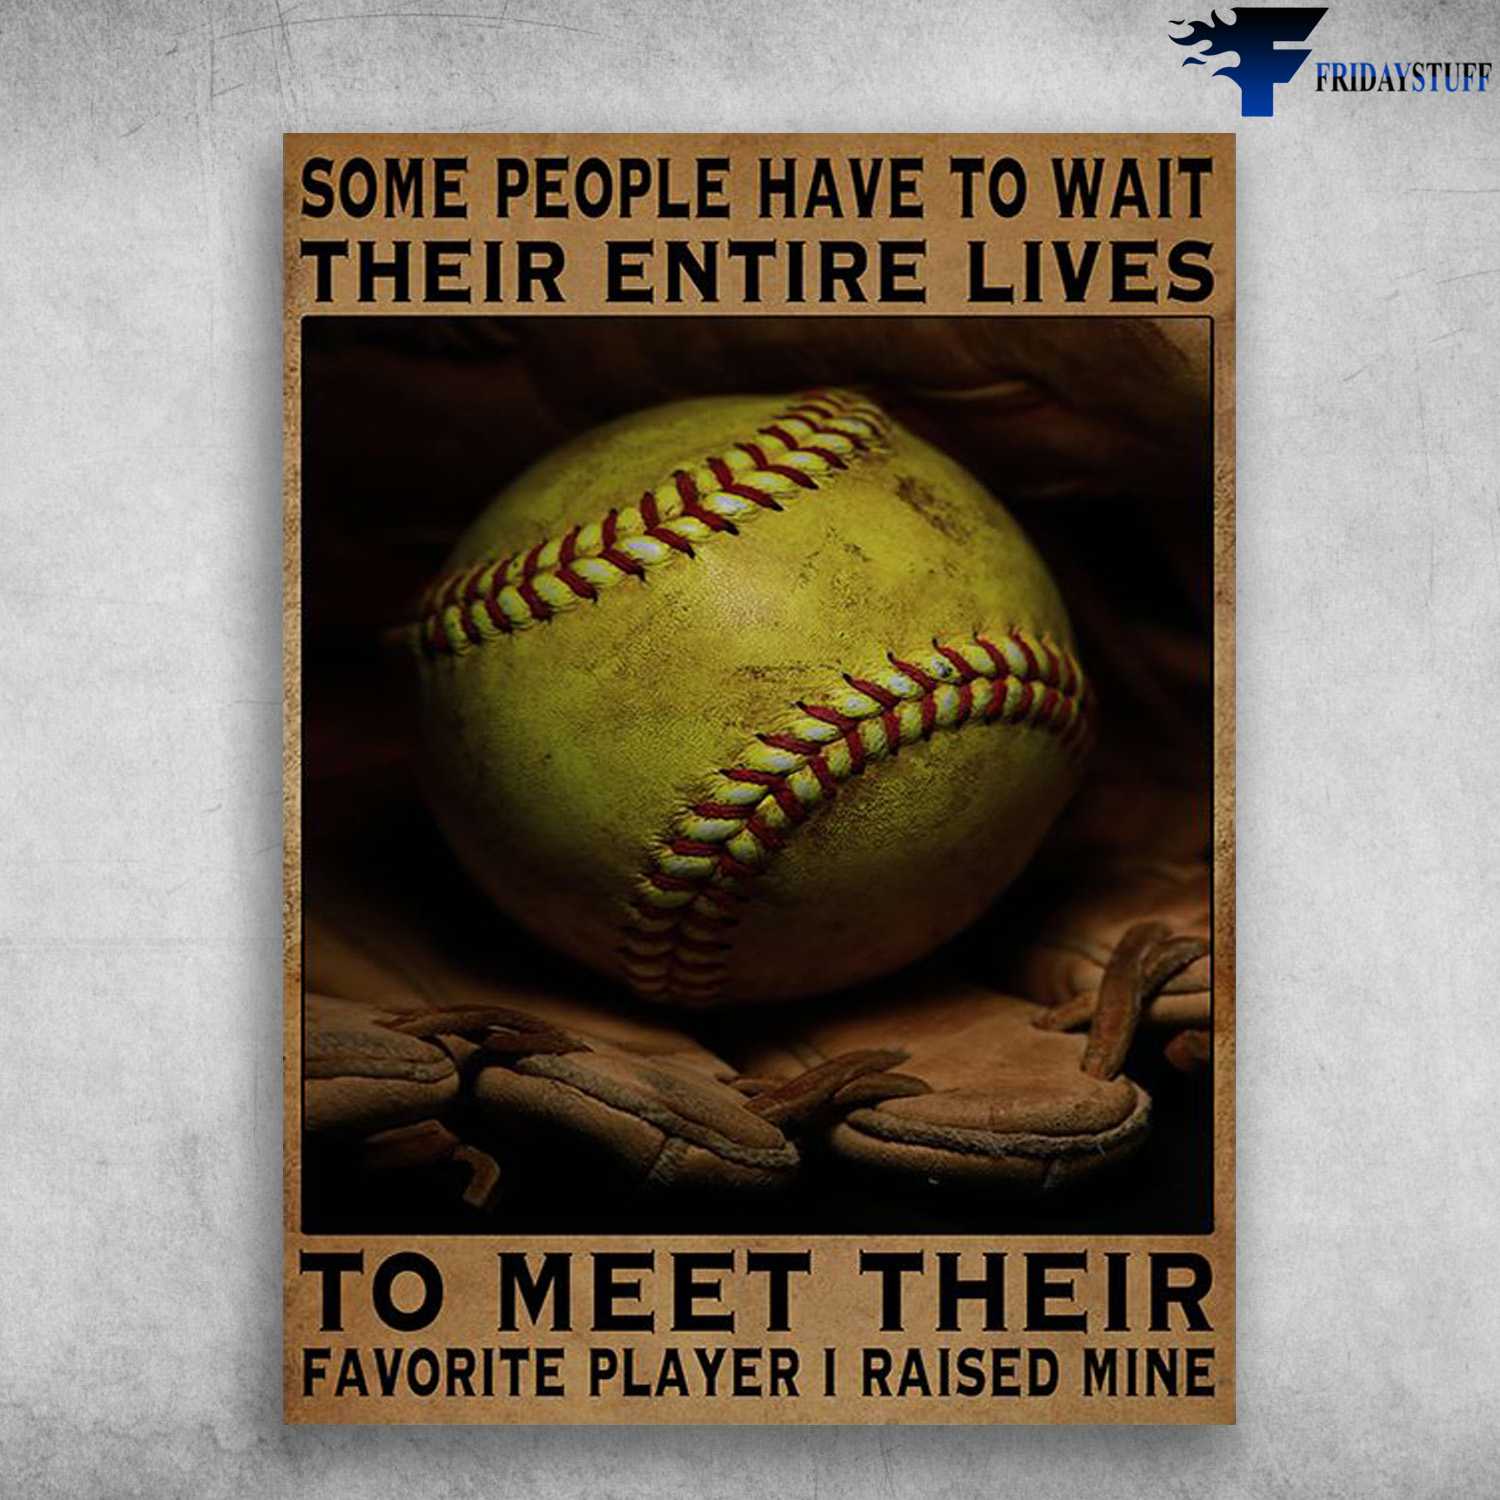 Softball Lover, Softball Poster - Some People Have To Wait Their Entire Lives, To Meet Their Favorite Player, I Raised Mine